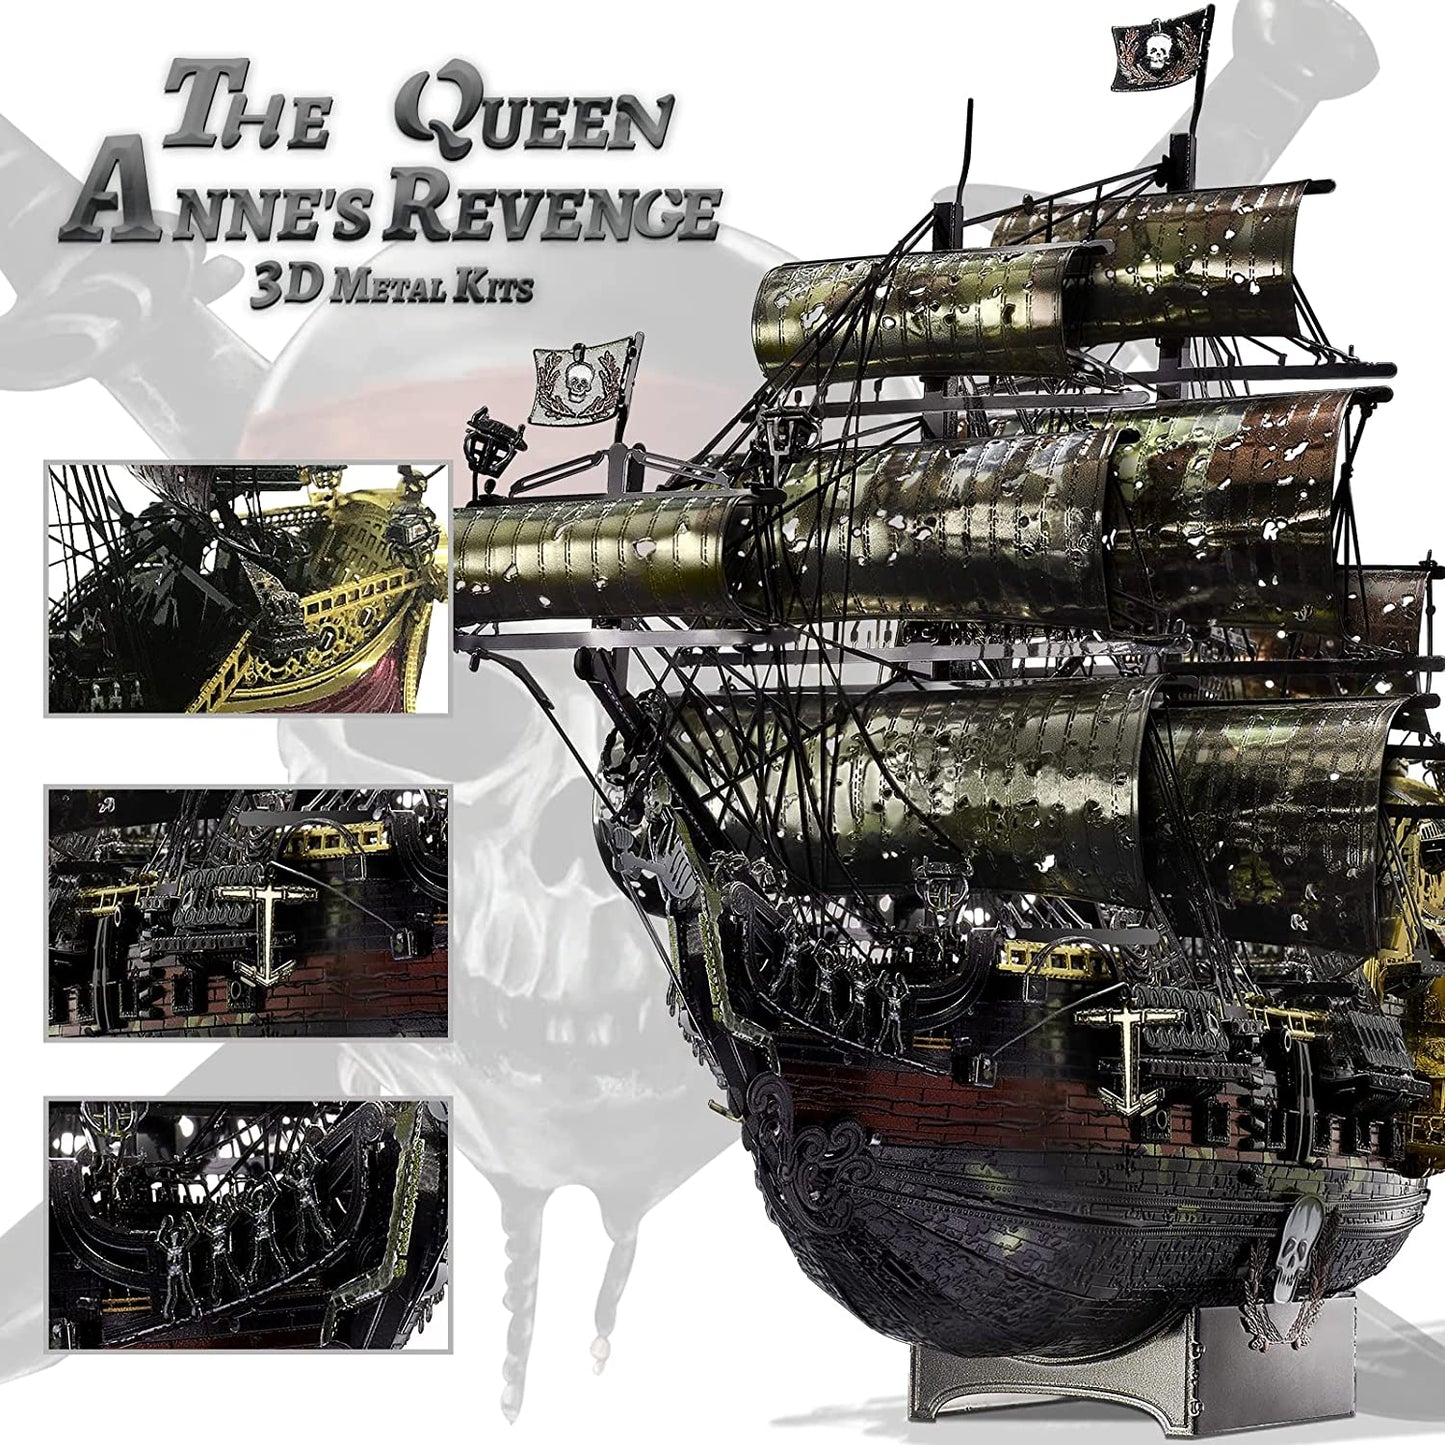 Piececool The Queen Anne's Revenge Pirate Ship Model Kits